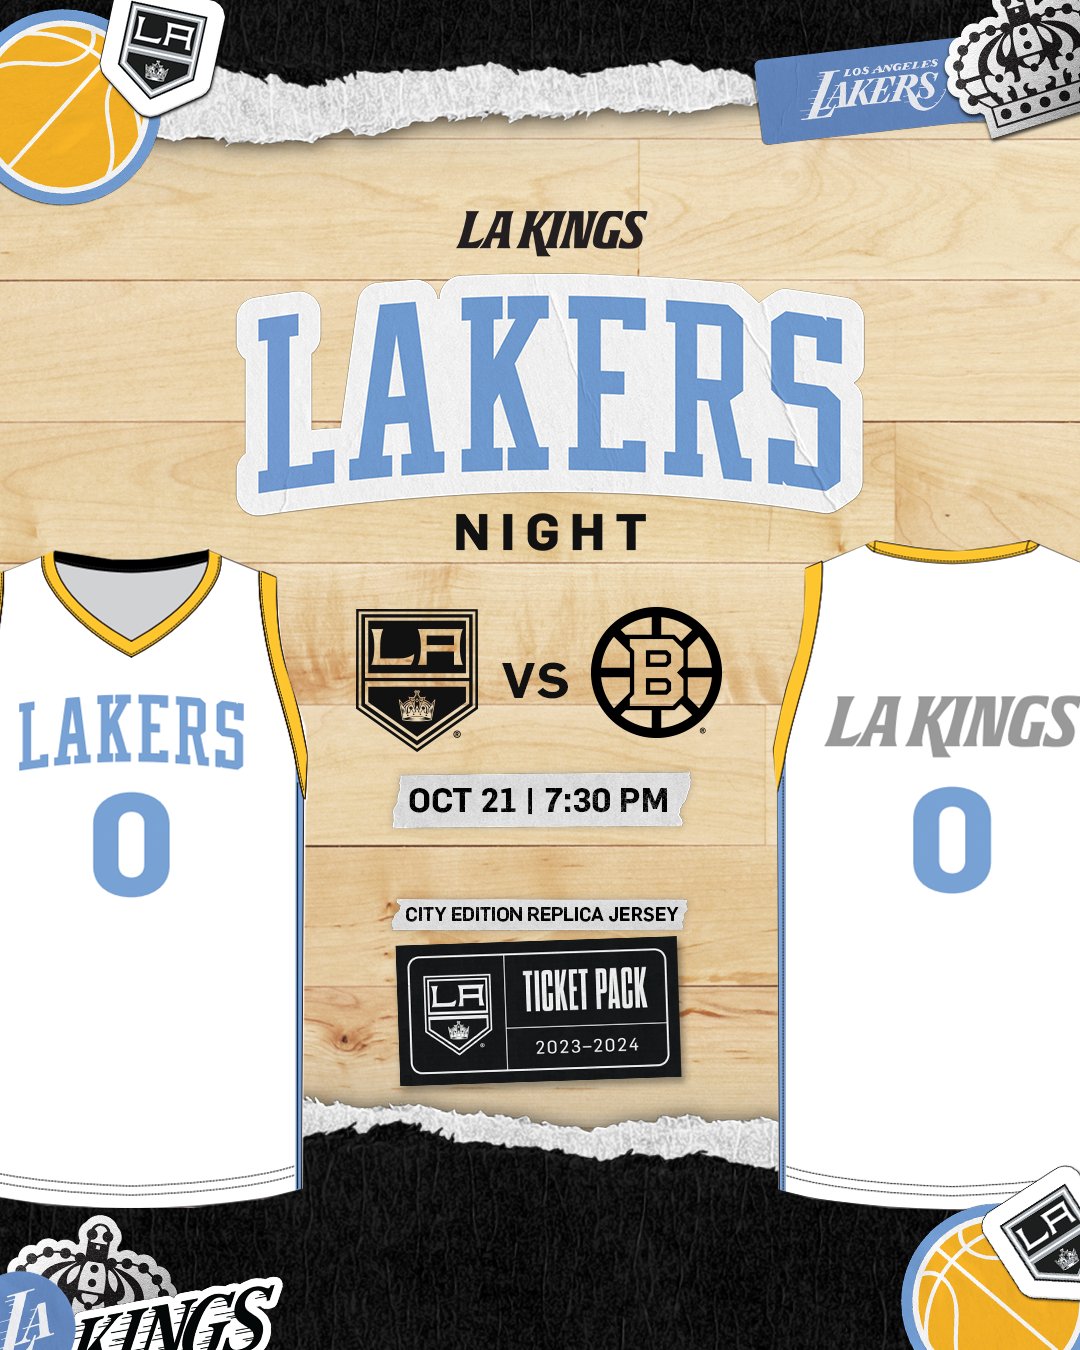 LA Kings on X: .@Lakers Night at the LA Kings game is just around the  corner! Buy a ticket pack now and you'll get Kings X Lakers New Era hat 👌  BUY